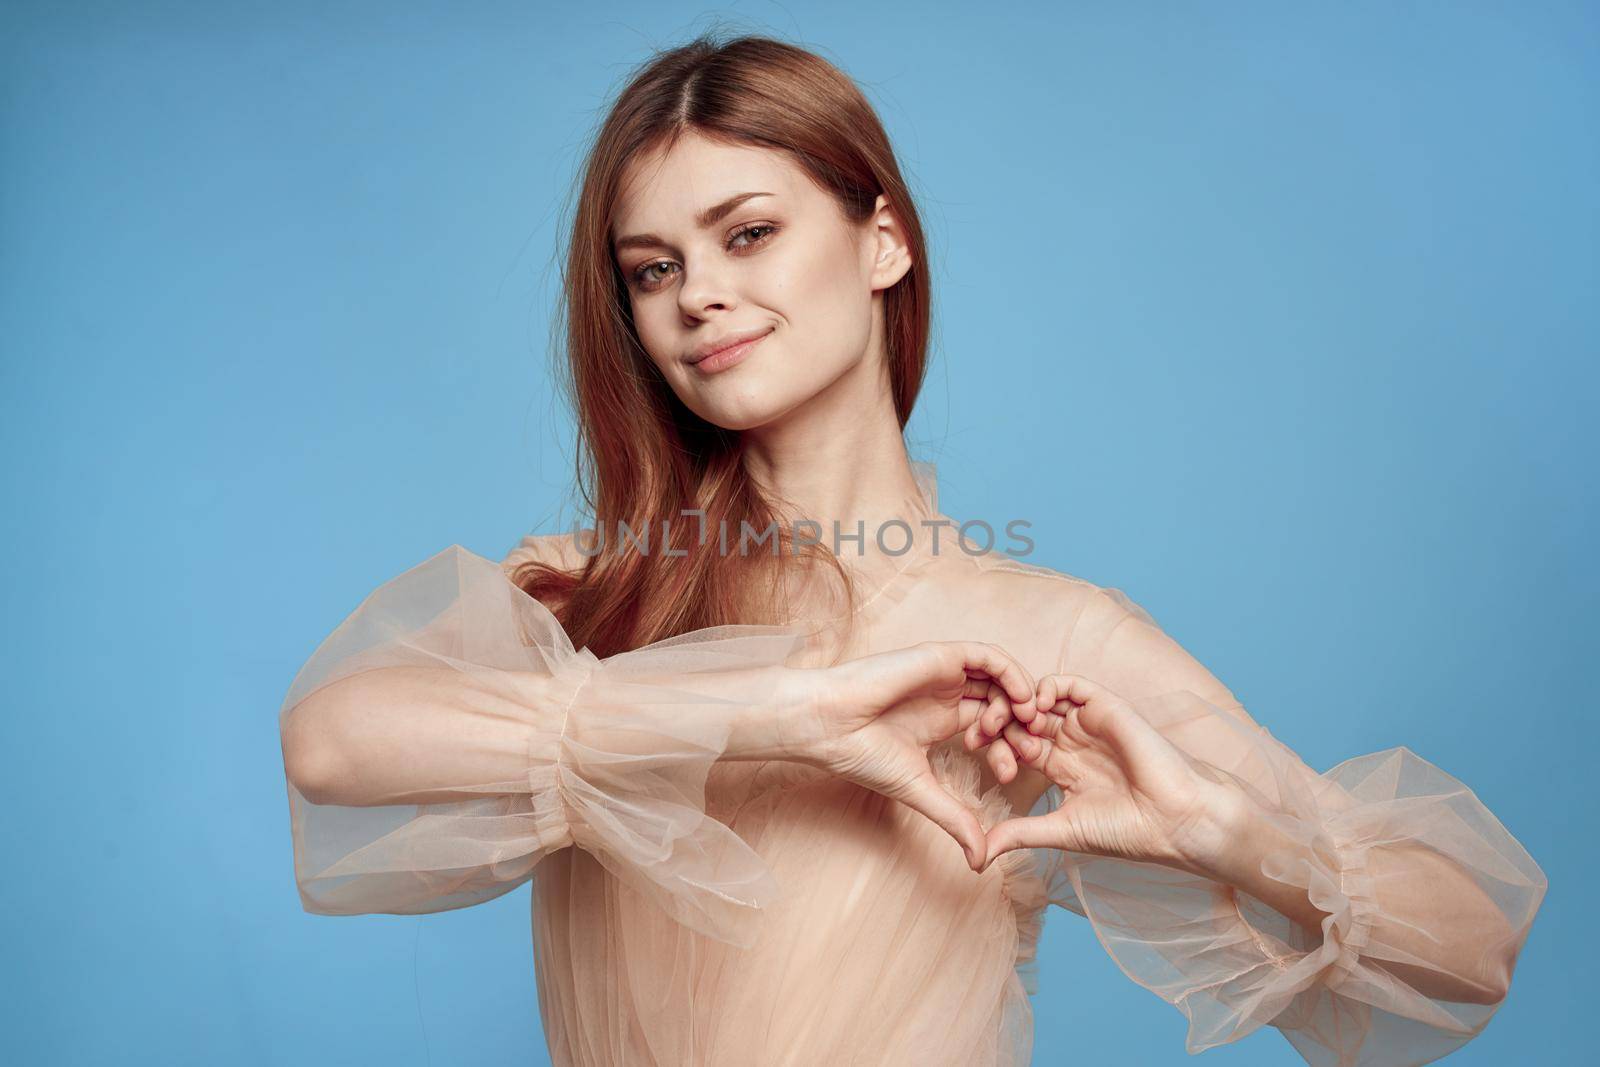 cheerful woman in beige dress posing charm blue background. High quality photo